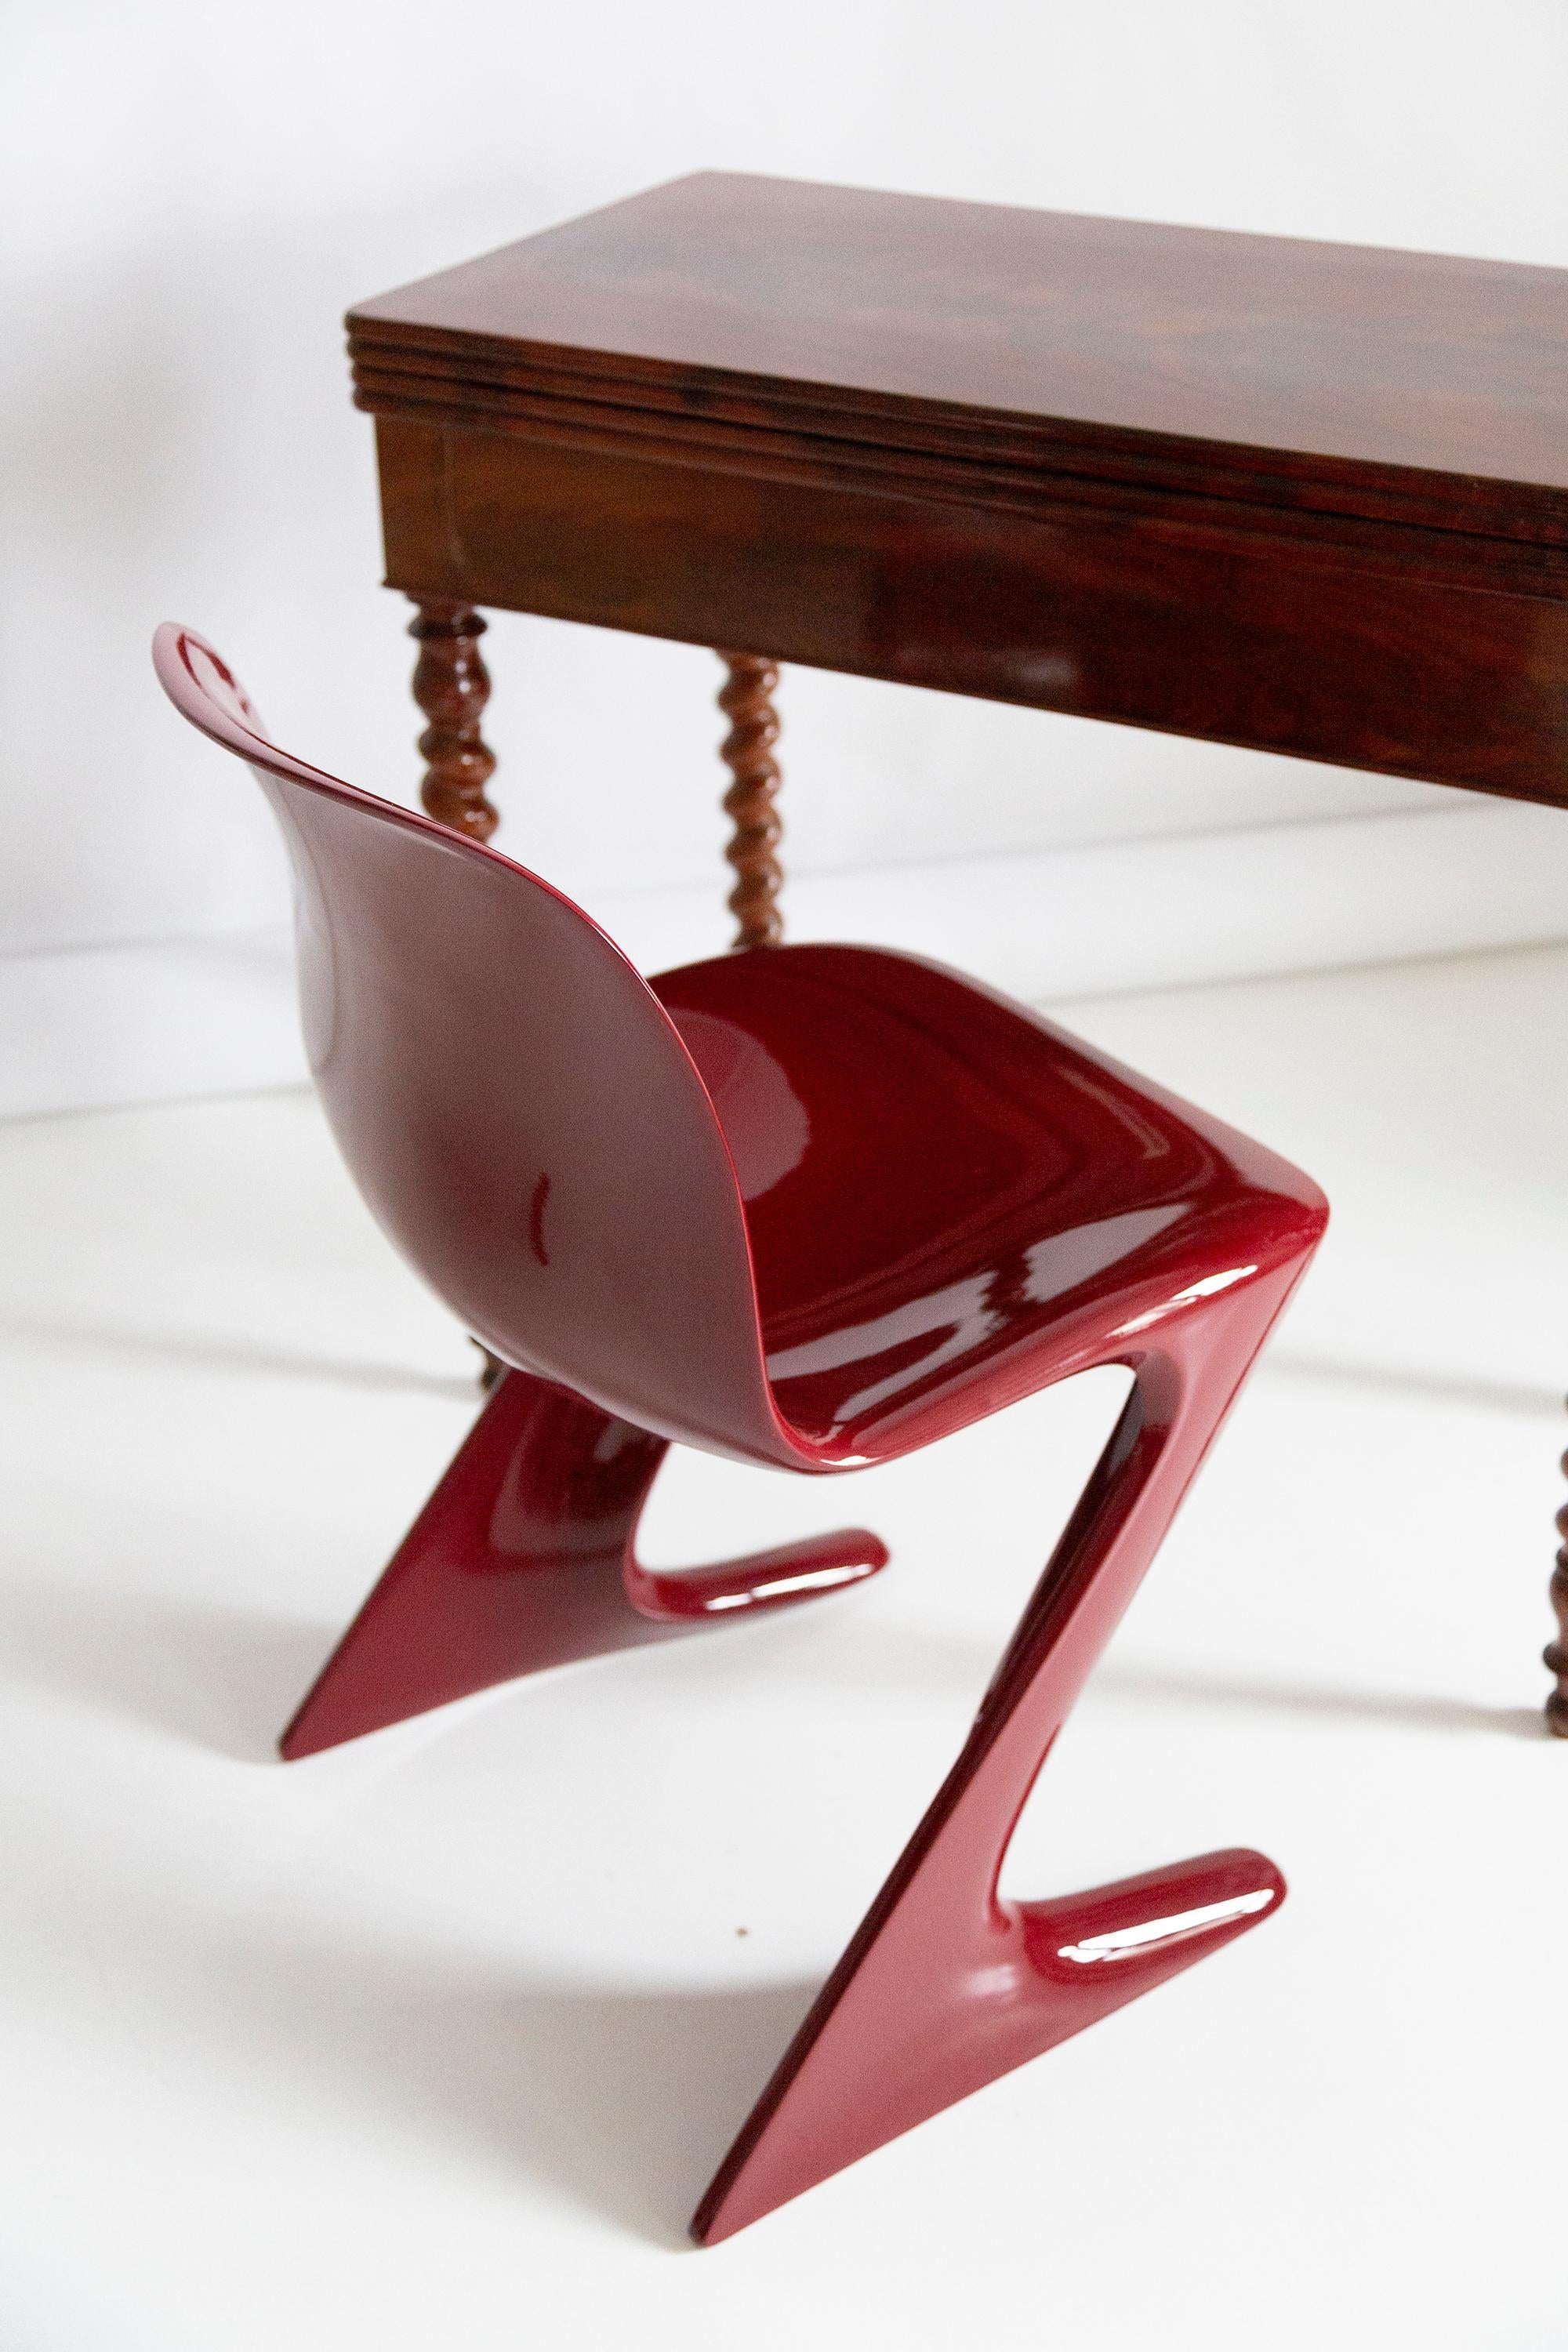 Pair of Dark Red Wine Kangaroo Chairs Designed by Ernst Moeckl, Germany, 1968 For Sale 6